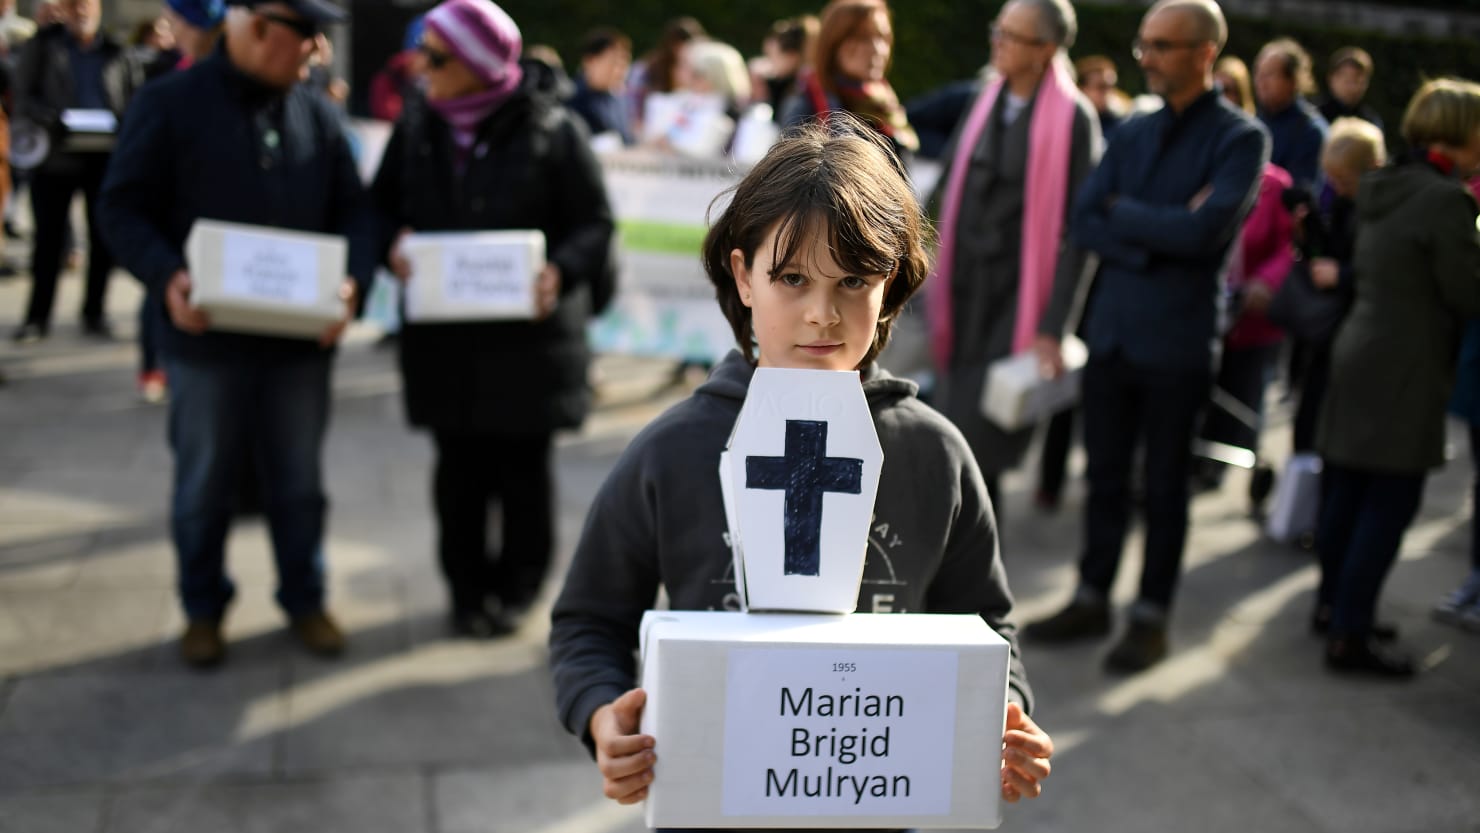 Ireland says 9,000 babies died in Catholic homes, but it was society’s fault, not the Church’s